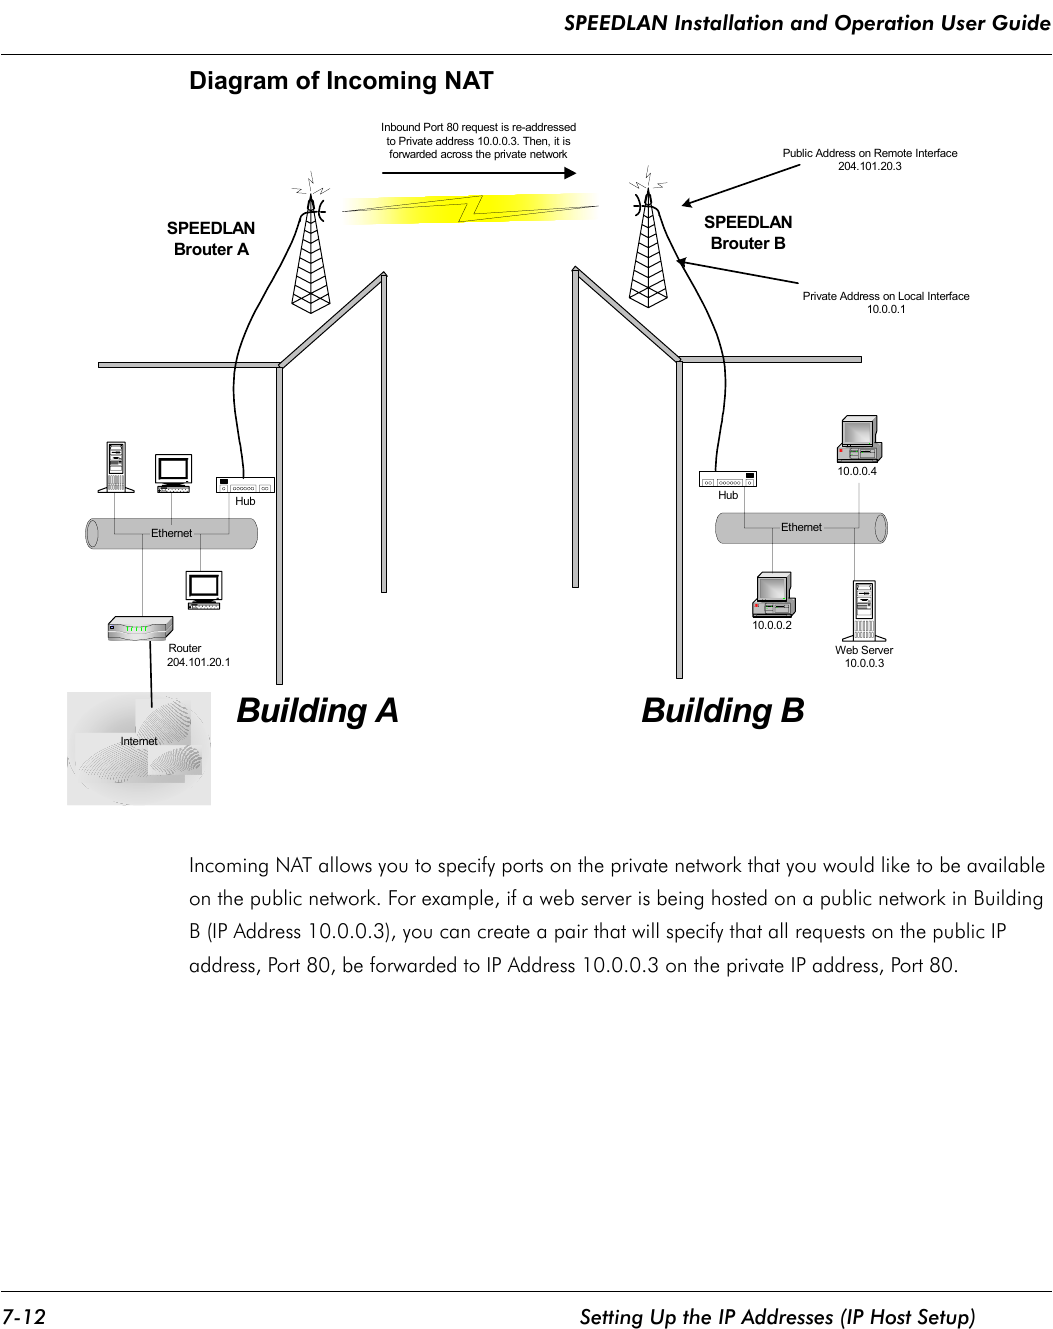 SPEEDLAN Installation and Operation User Guide 7-12 Setting Up the IP Addresses (IP Host Setup)Diagram of Incoming NATIncoming NAT allows you to specify ports on the private network that you would like to be available on the public network. For example, if a web server is being hosted on a public network in Building B (IP Address 10.0.0.3), you can create a pair that will specify that all requests on the public IP address, Port 80, be forwarded to IP Address 10.0.0.3 on the private IP address, Port 80.Inbound Port 80 request is re-addressedto Private address 10.0.0.3. Then, it isforwarded across the private networkInternetEthernet                               Router                                        204.101.20.1SPEEDLANBrouter AHubSPEEDLANBrouter BPrivate Address on Local Interface10.0.0.110.0.0.210.0.0.4EthernetHubWeb Server10.0.0.3Public Address on Remote Interface204.101.20.3Building A Building B